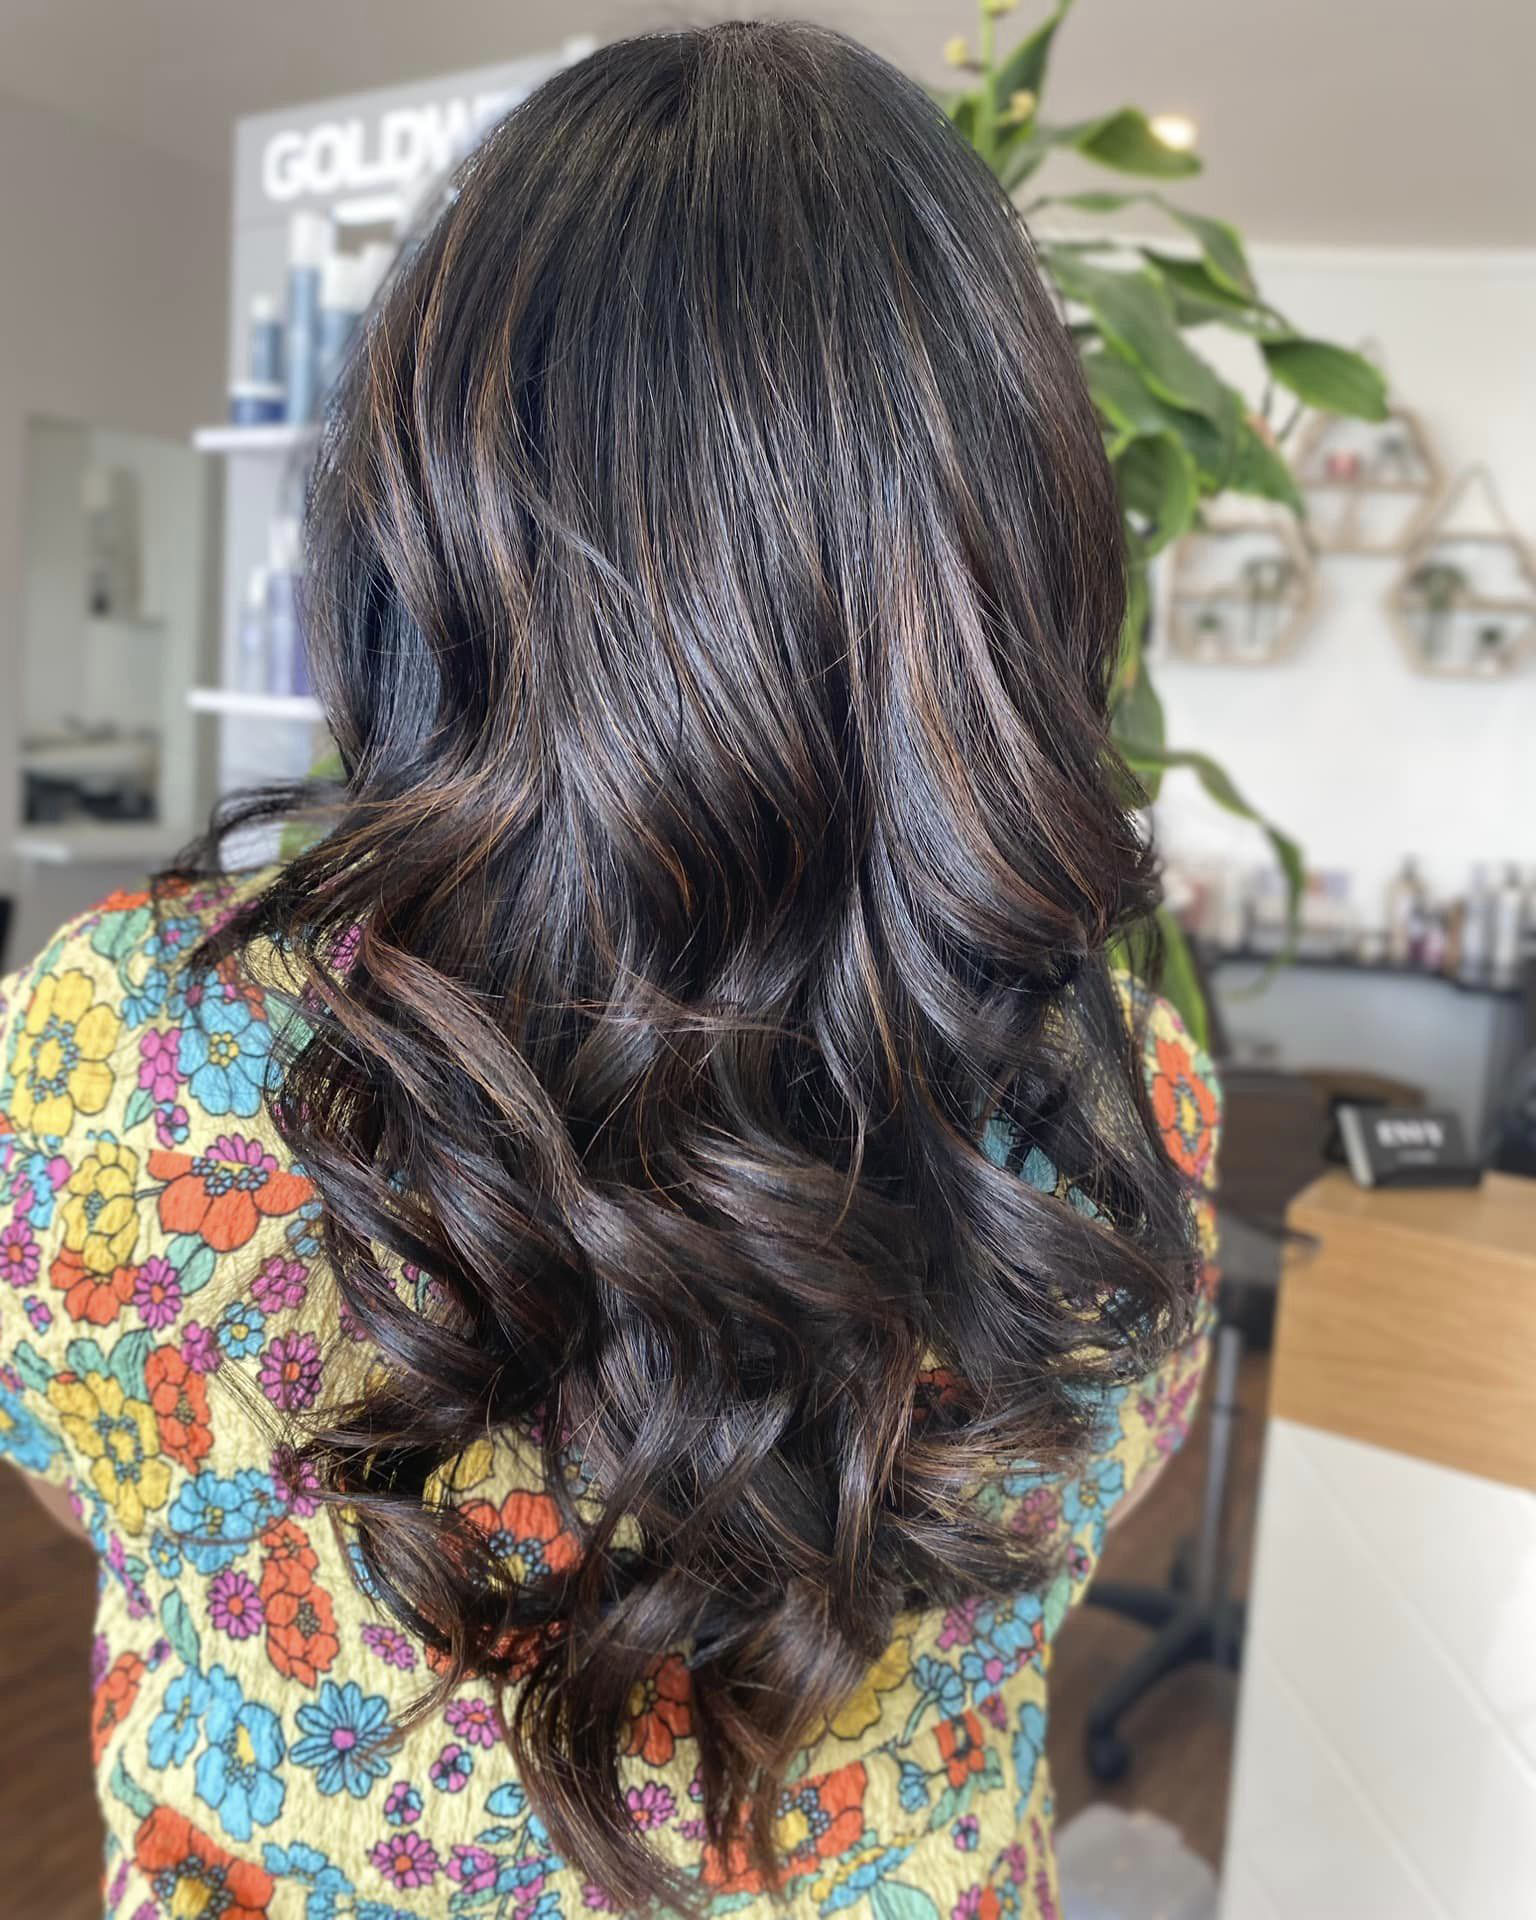 Freshly cut dark brown hair with light brown highlights done at Envy Hair Salon, one of the best hairdressers in Tauranga.